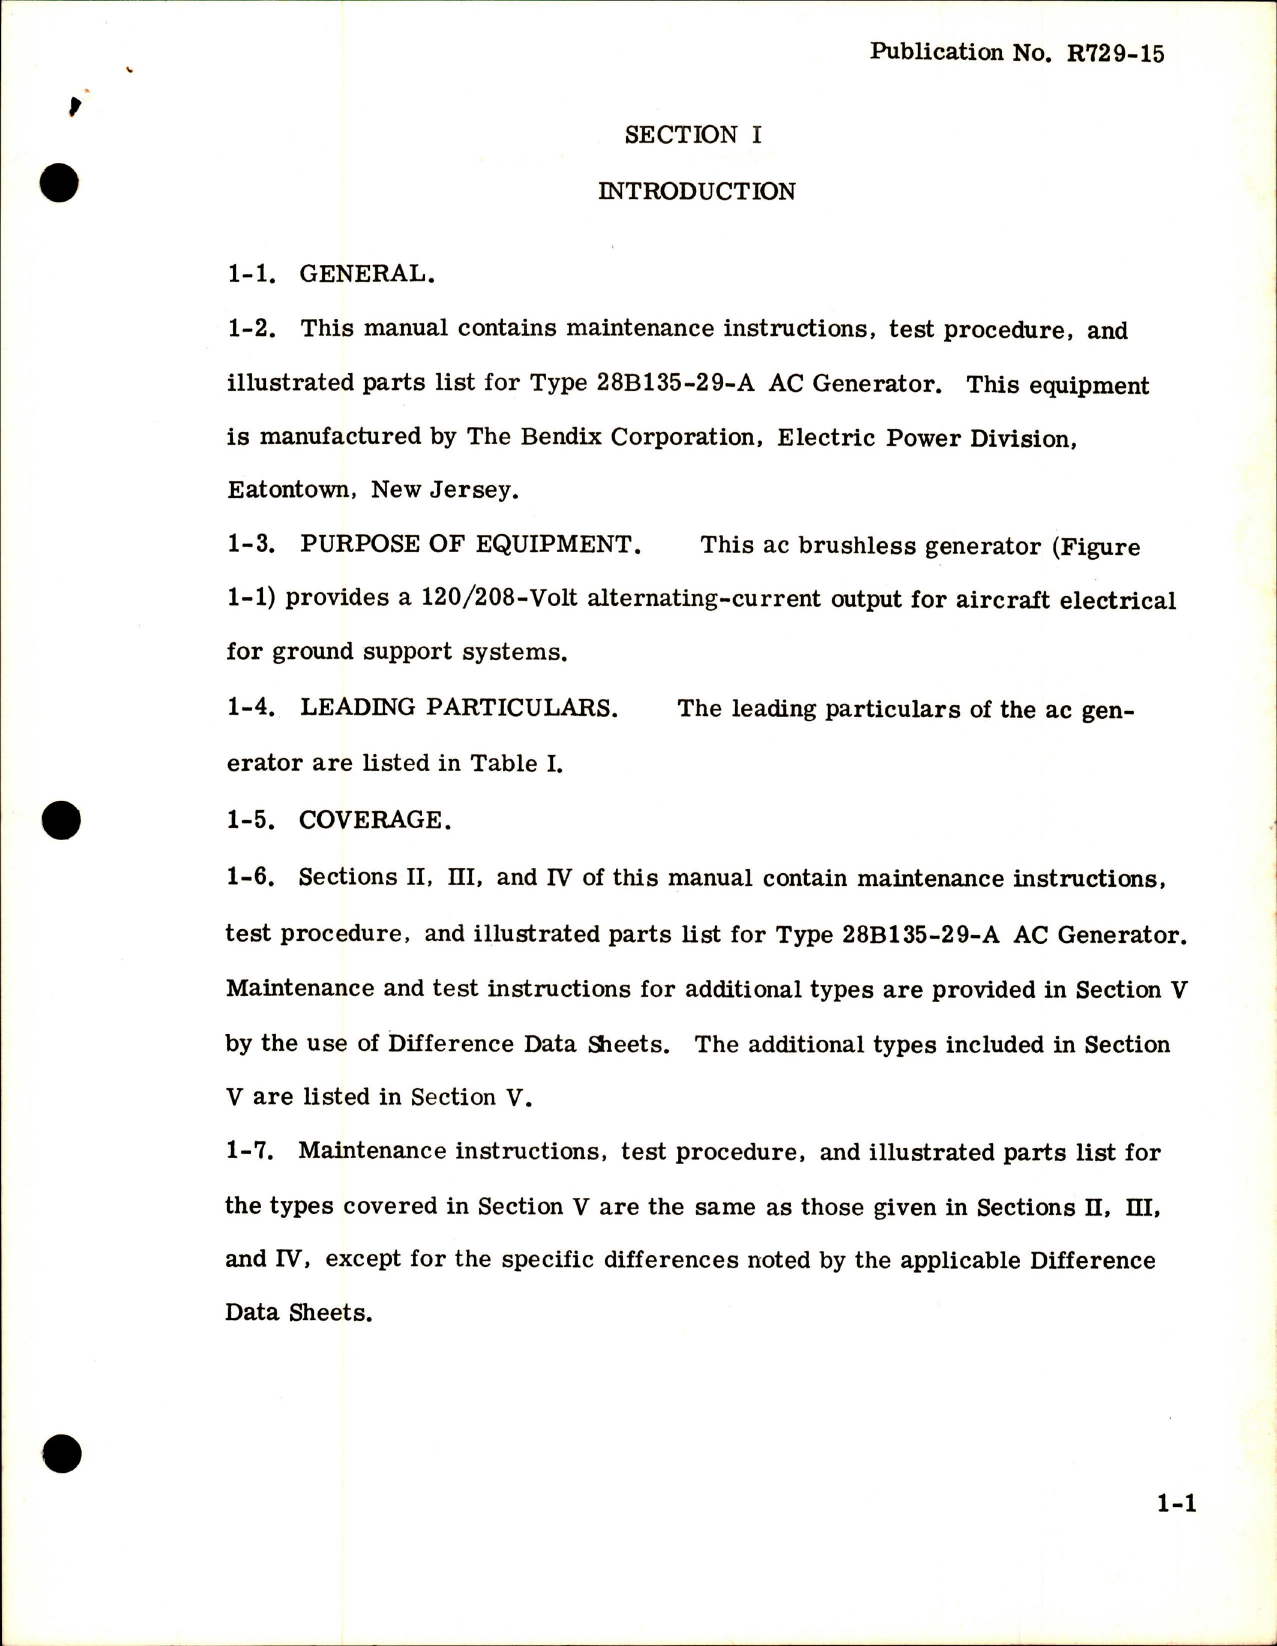 Sample page 7 from AirCorps Library document: Maintenance Instructions with Parts for AC Generator - Type 28B135-29-A, 28B135-76-A